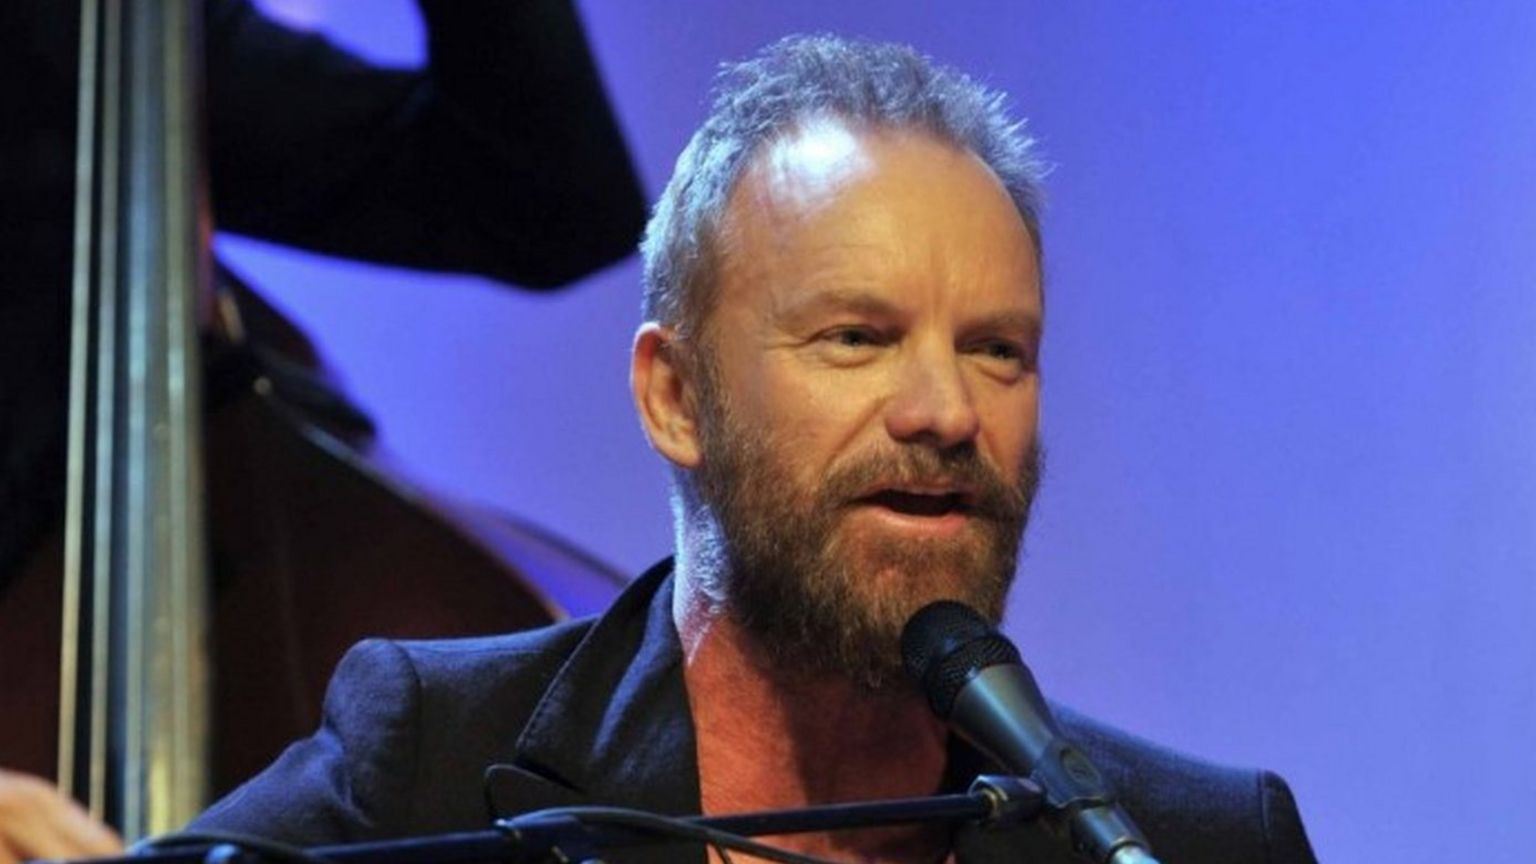 Sting on the Andrew Marr show